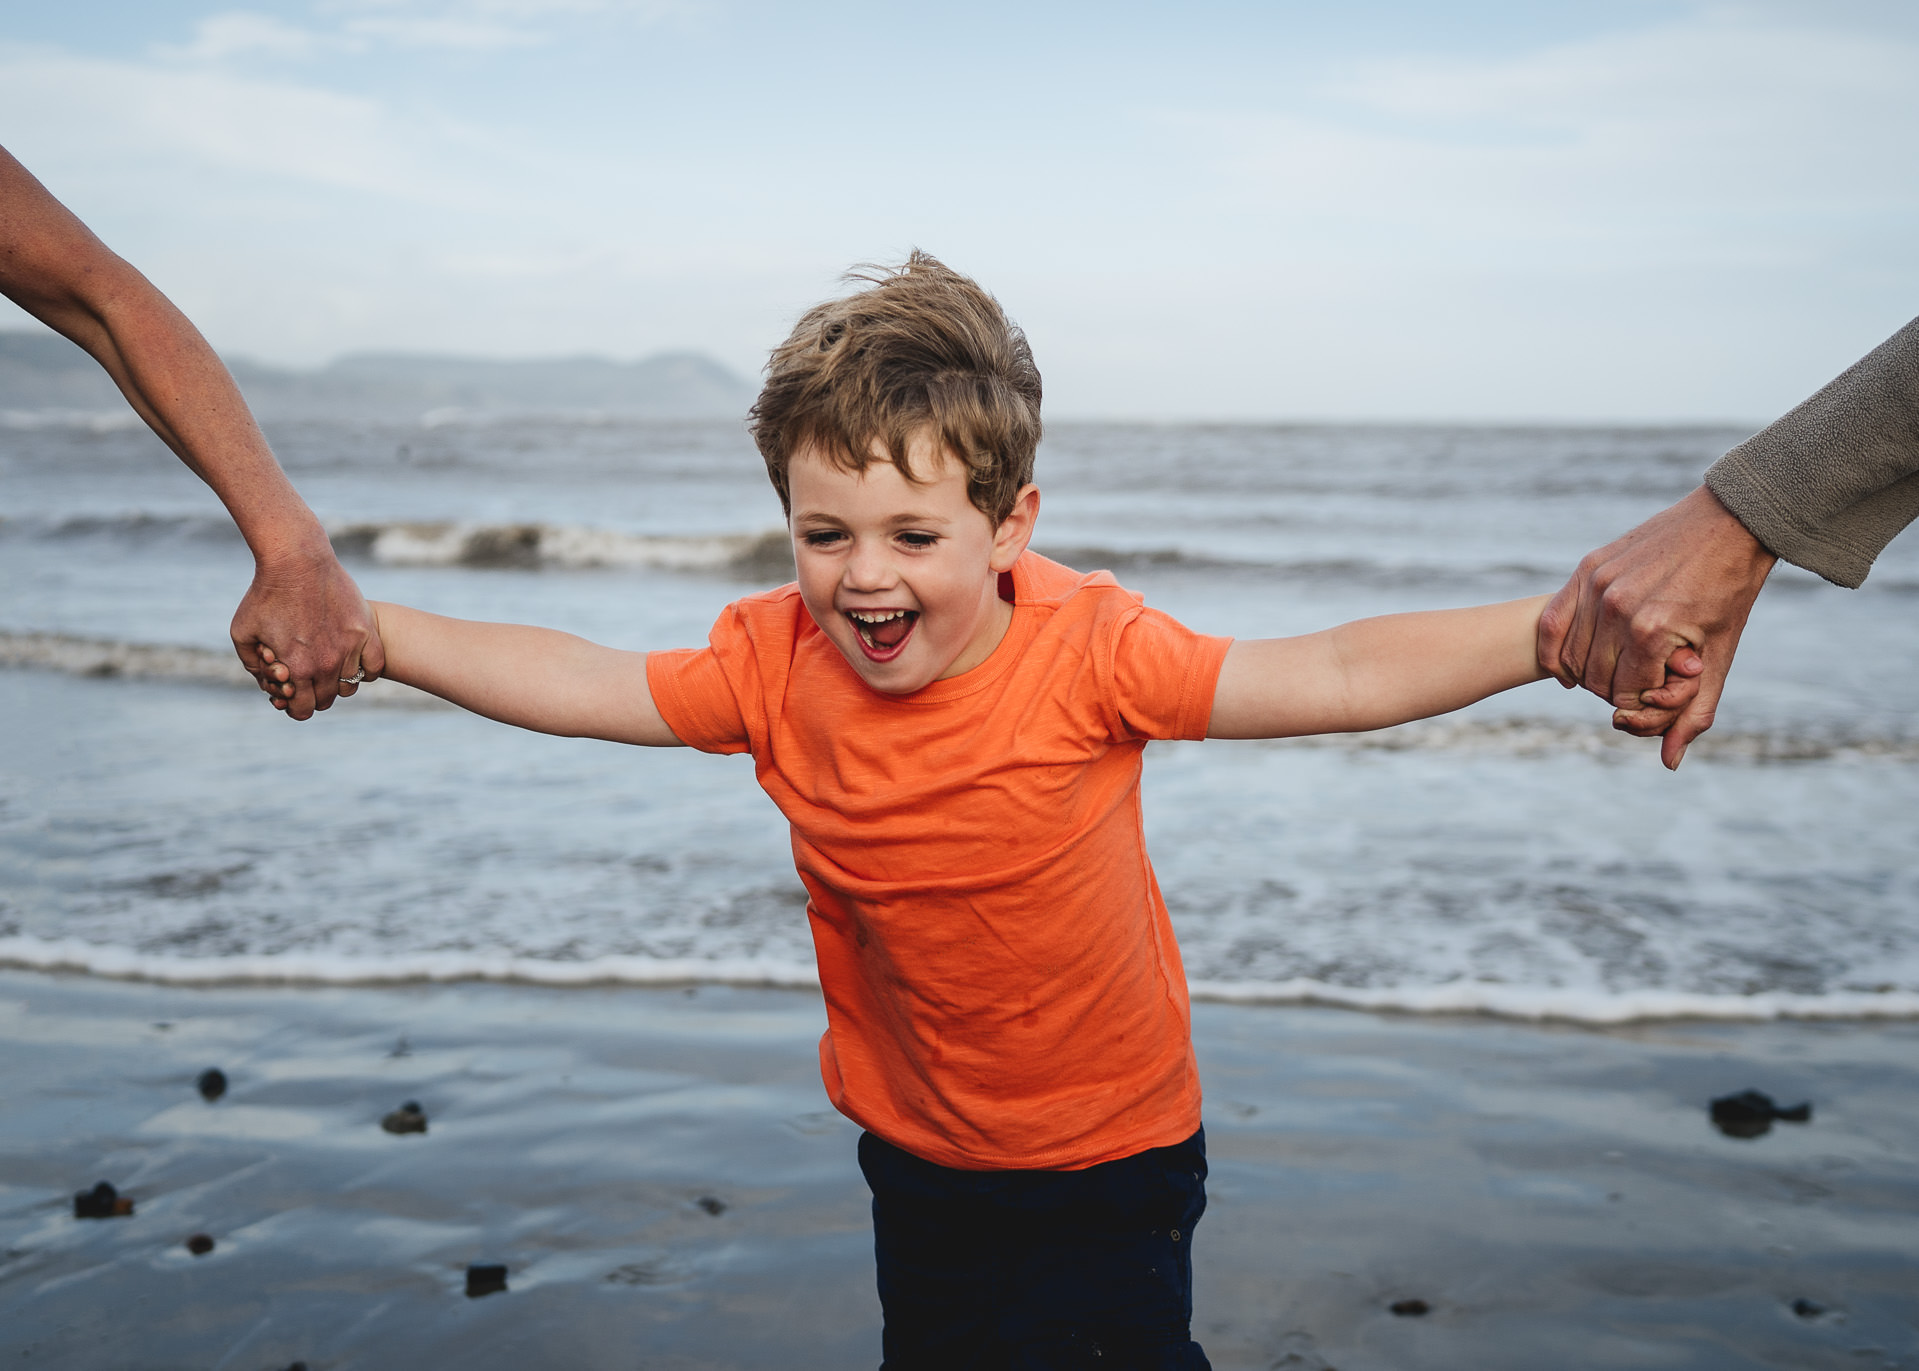 Devon family photography at the beach of a young boy laughing holding parents' hands